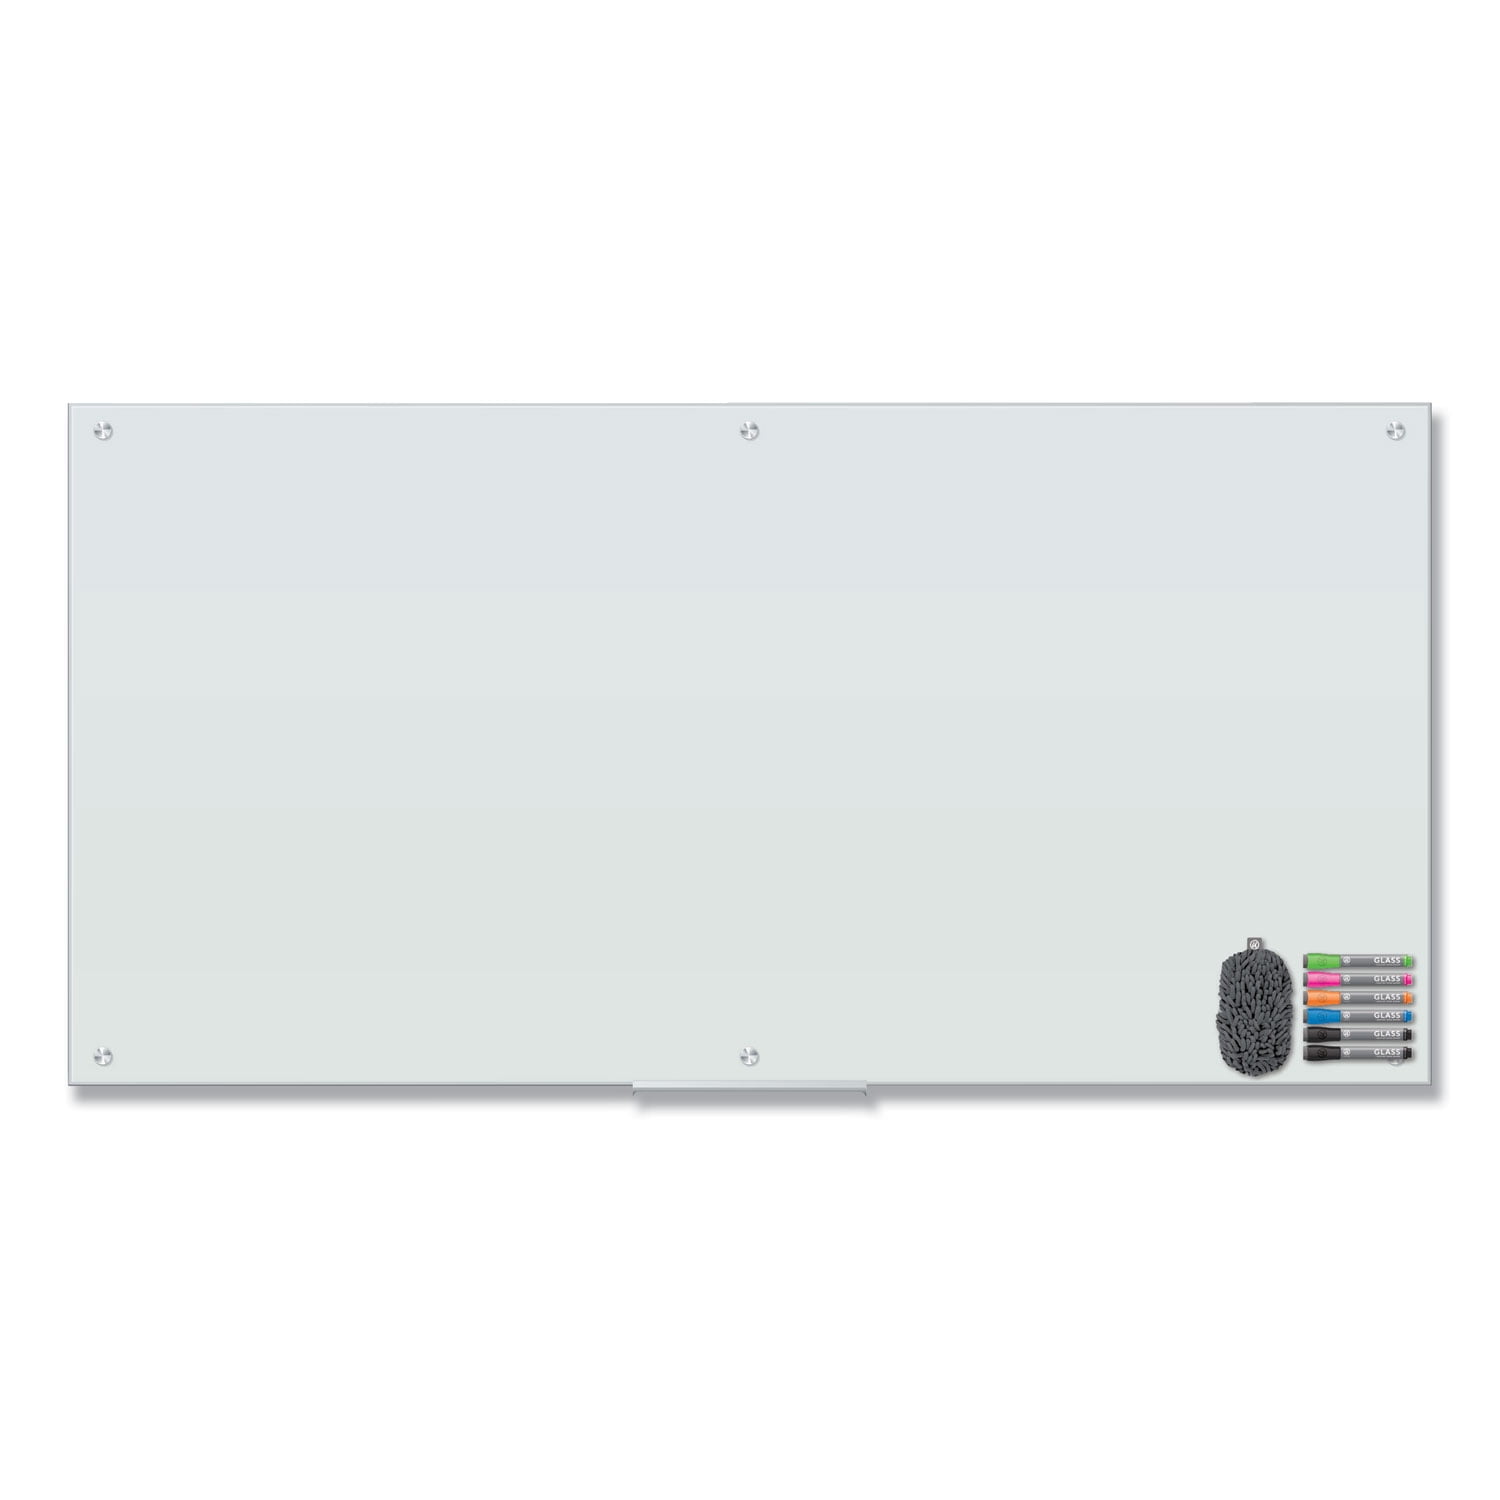 Large Magnetic Whiteboard, 72 x 40 inch Big Wall Mount White Board, Foldable Dry Erase Board with 1 Eraser 3 Markers and 6 Magnets, Aluminum Frame